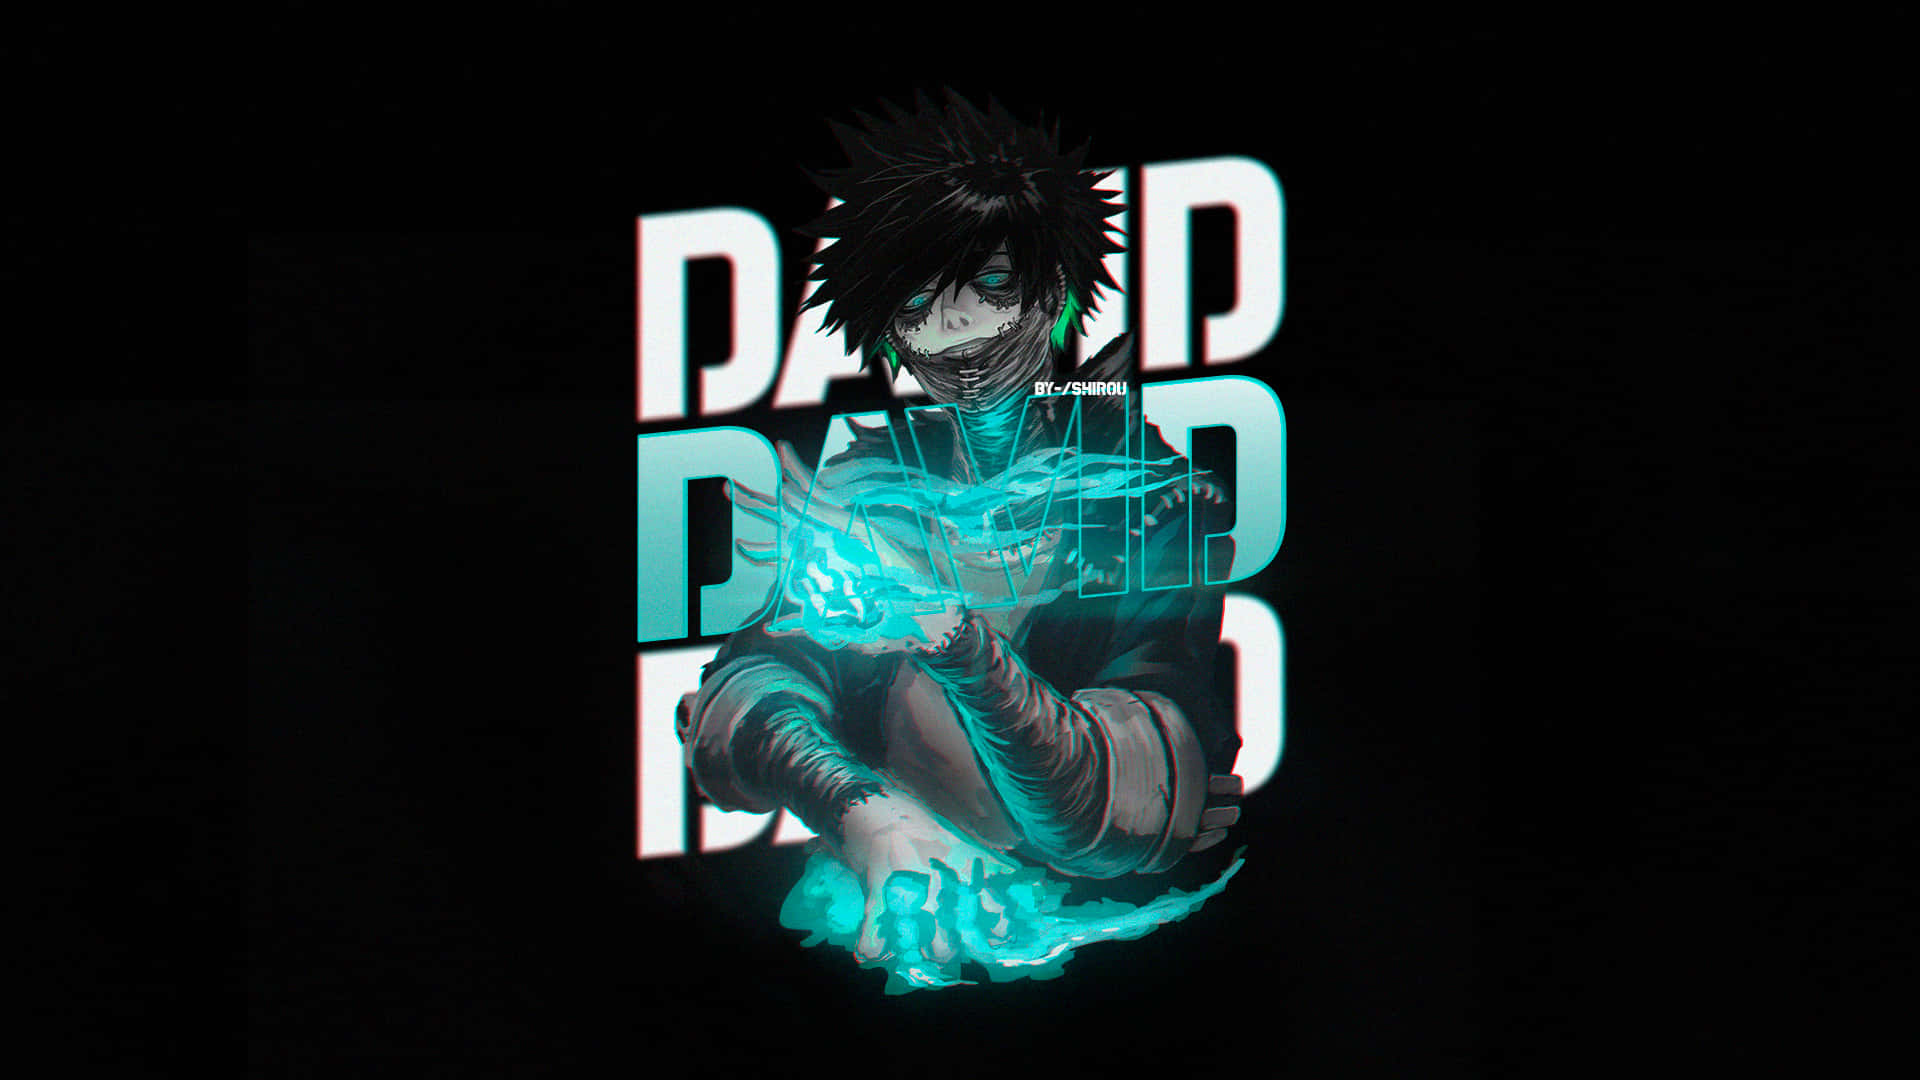 Dabi, the villain of My Hero Academia, looking powerful and determined. Wallpaper